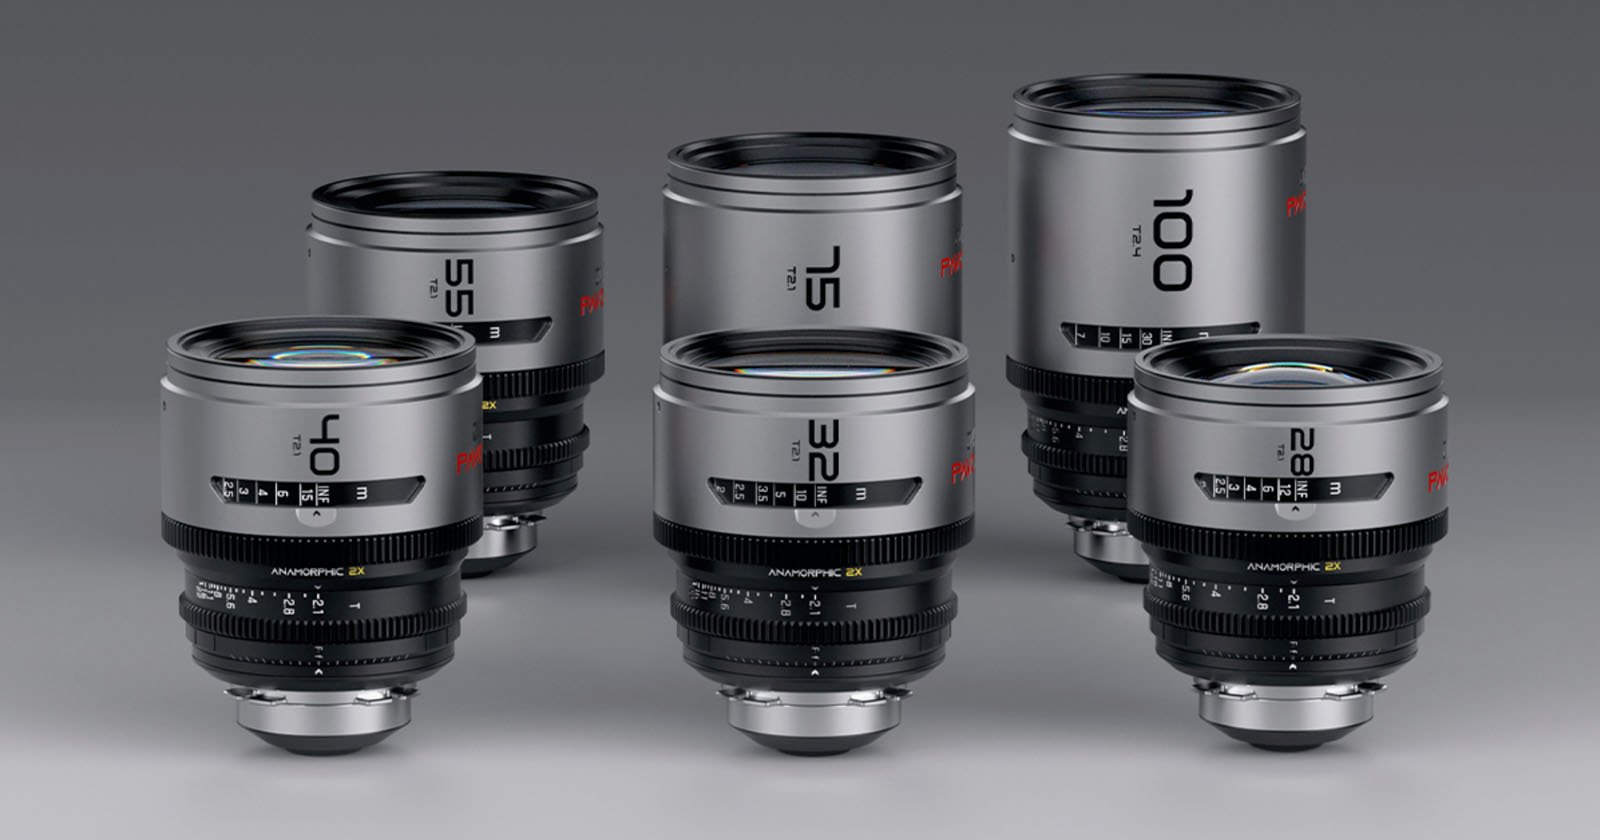 DZOFilms Pavo 2x Anamorphic Lenses for Super35 Are Available Now